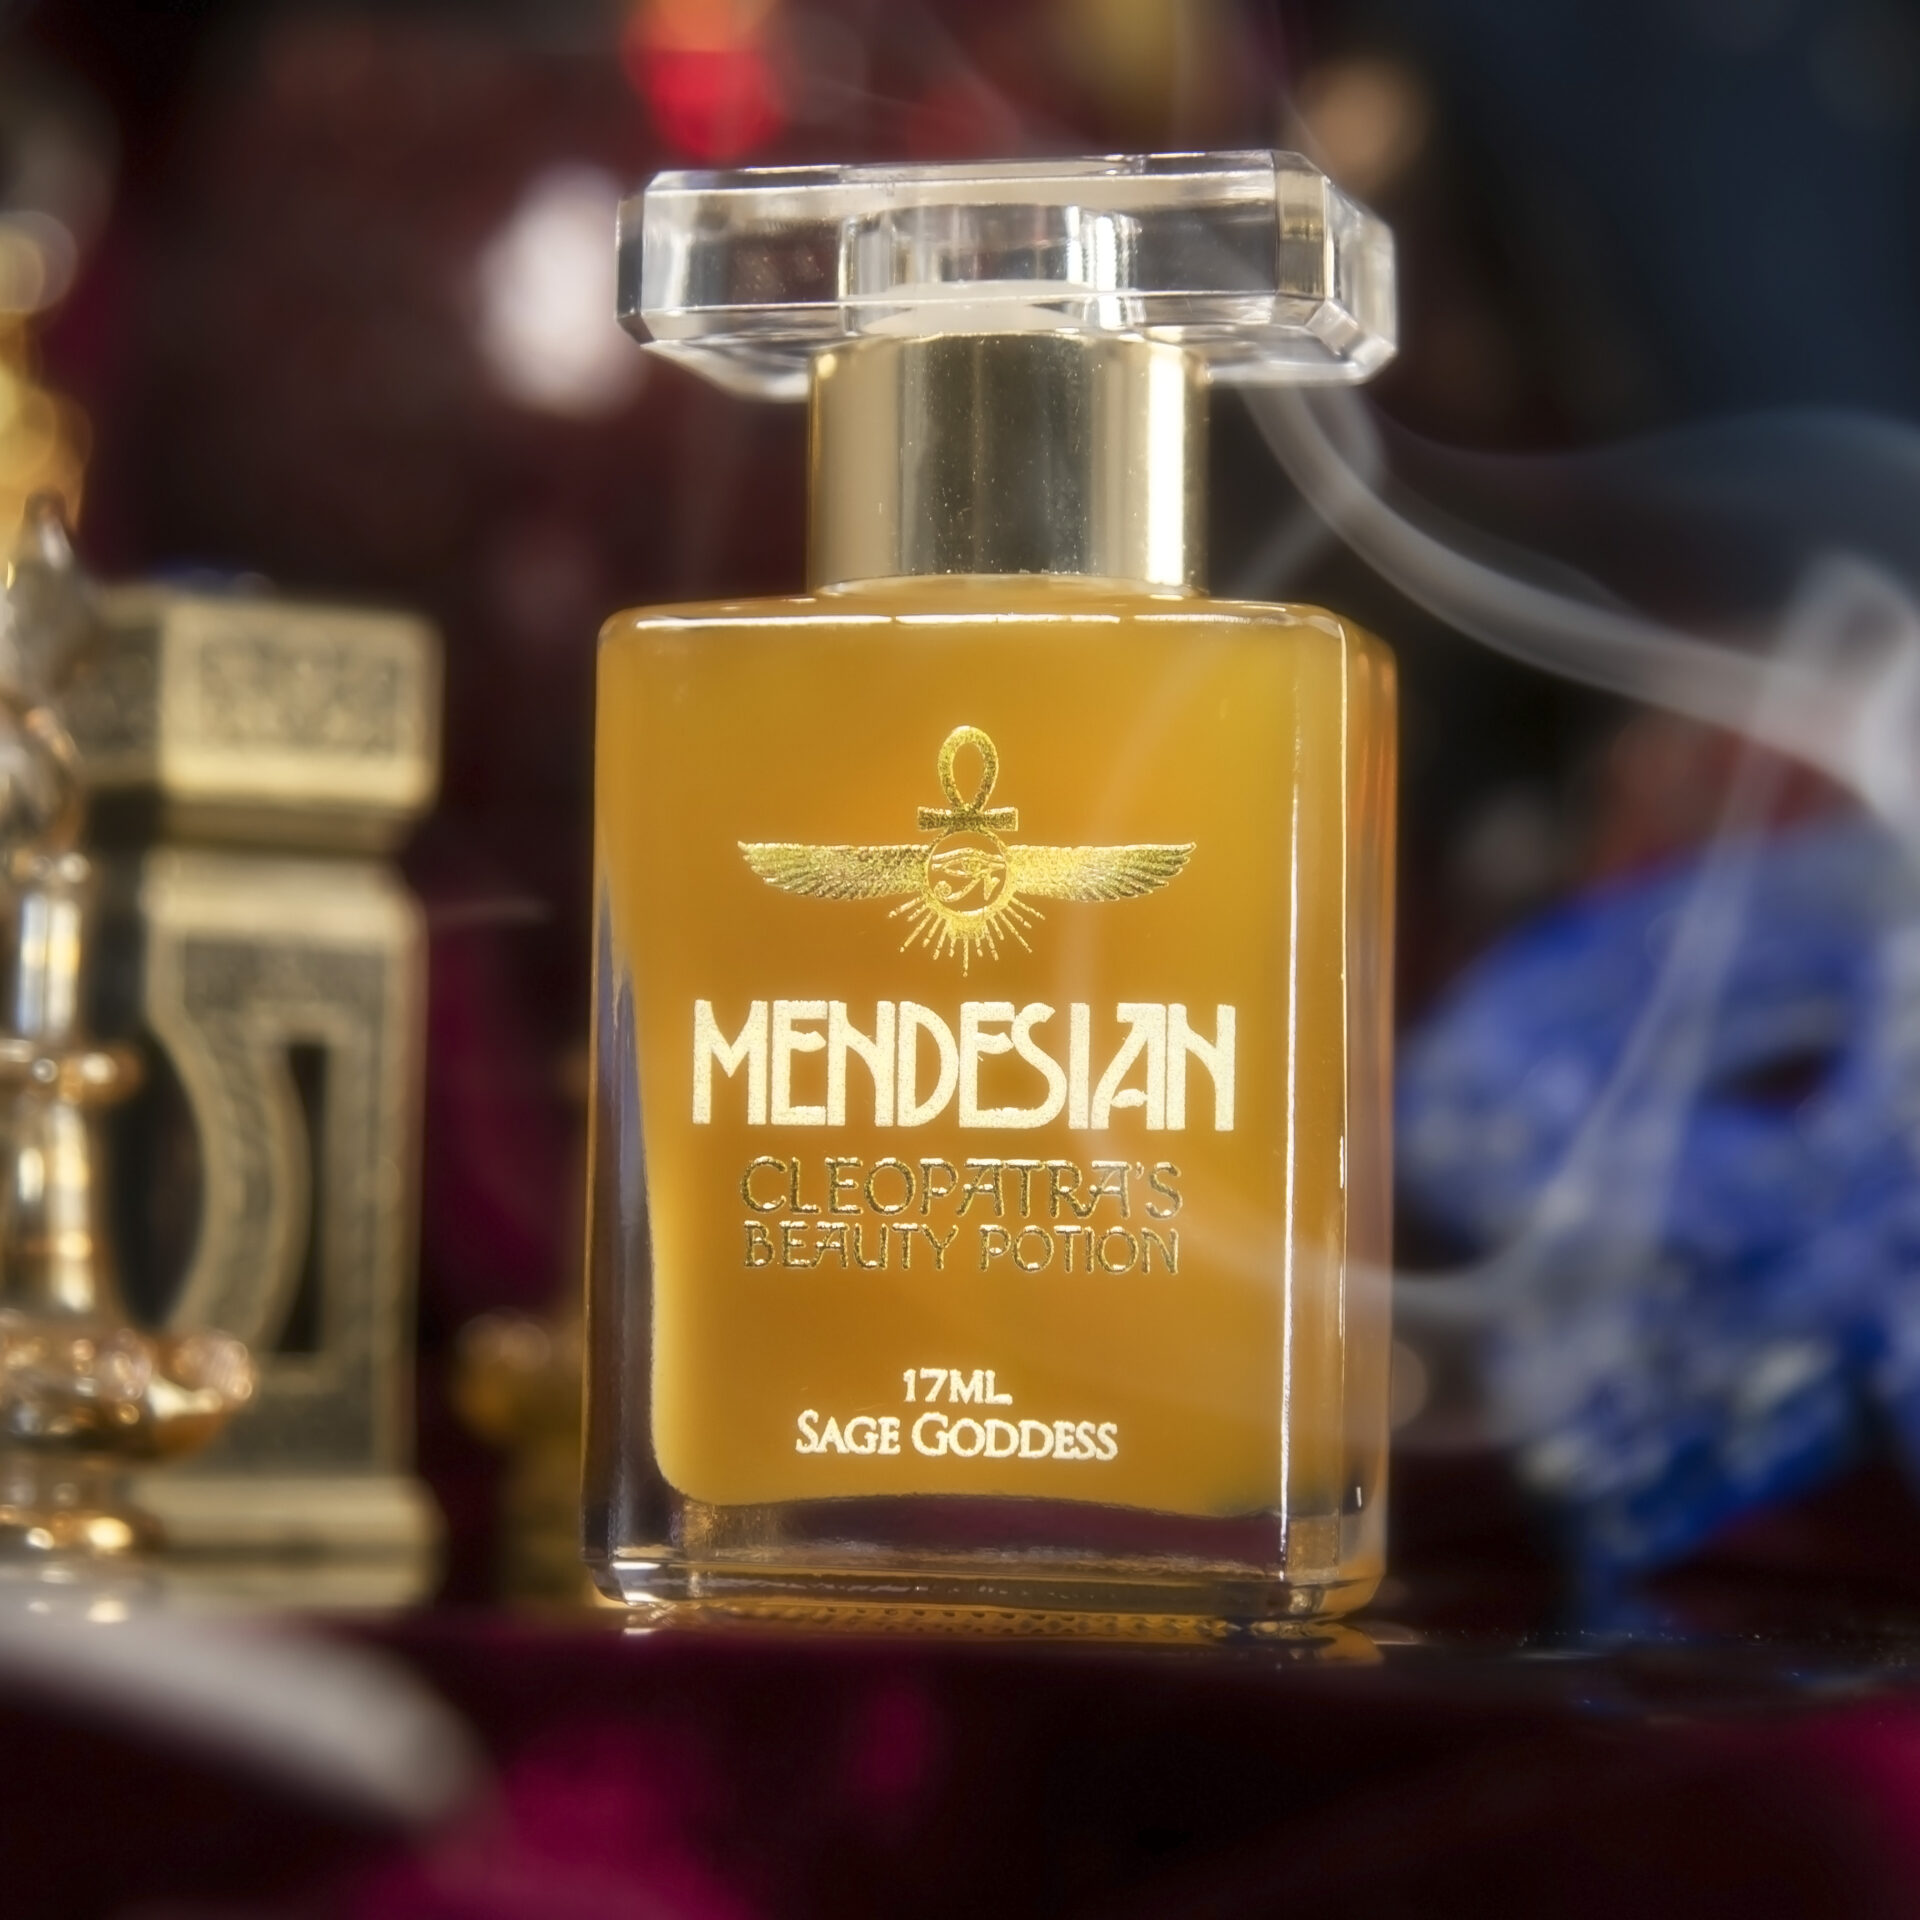 Sage Goddess Mendesian - Cleopatra's Beauty Potion for seduction